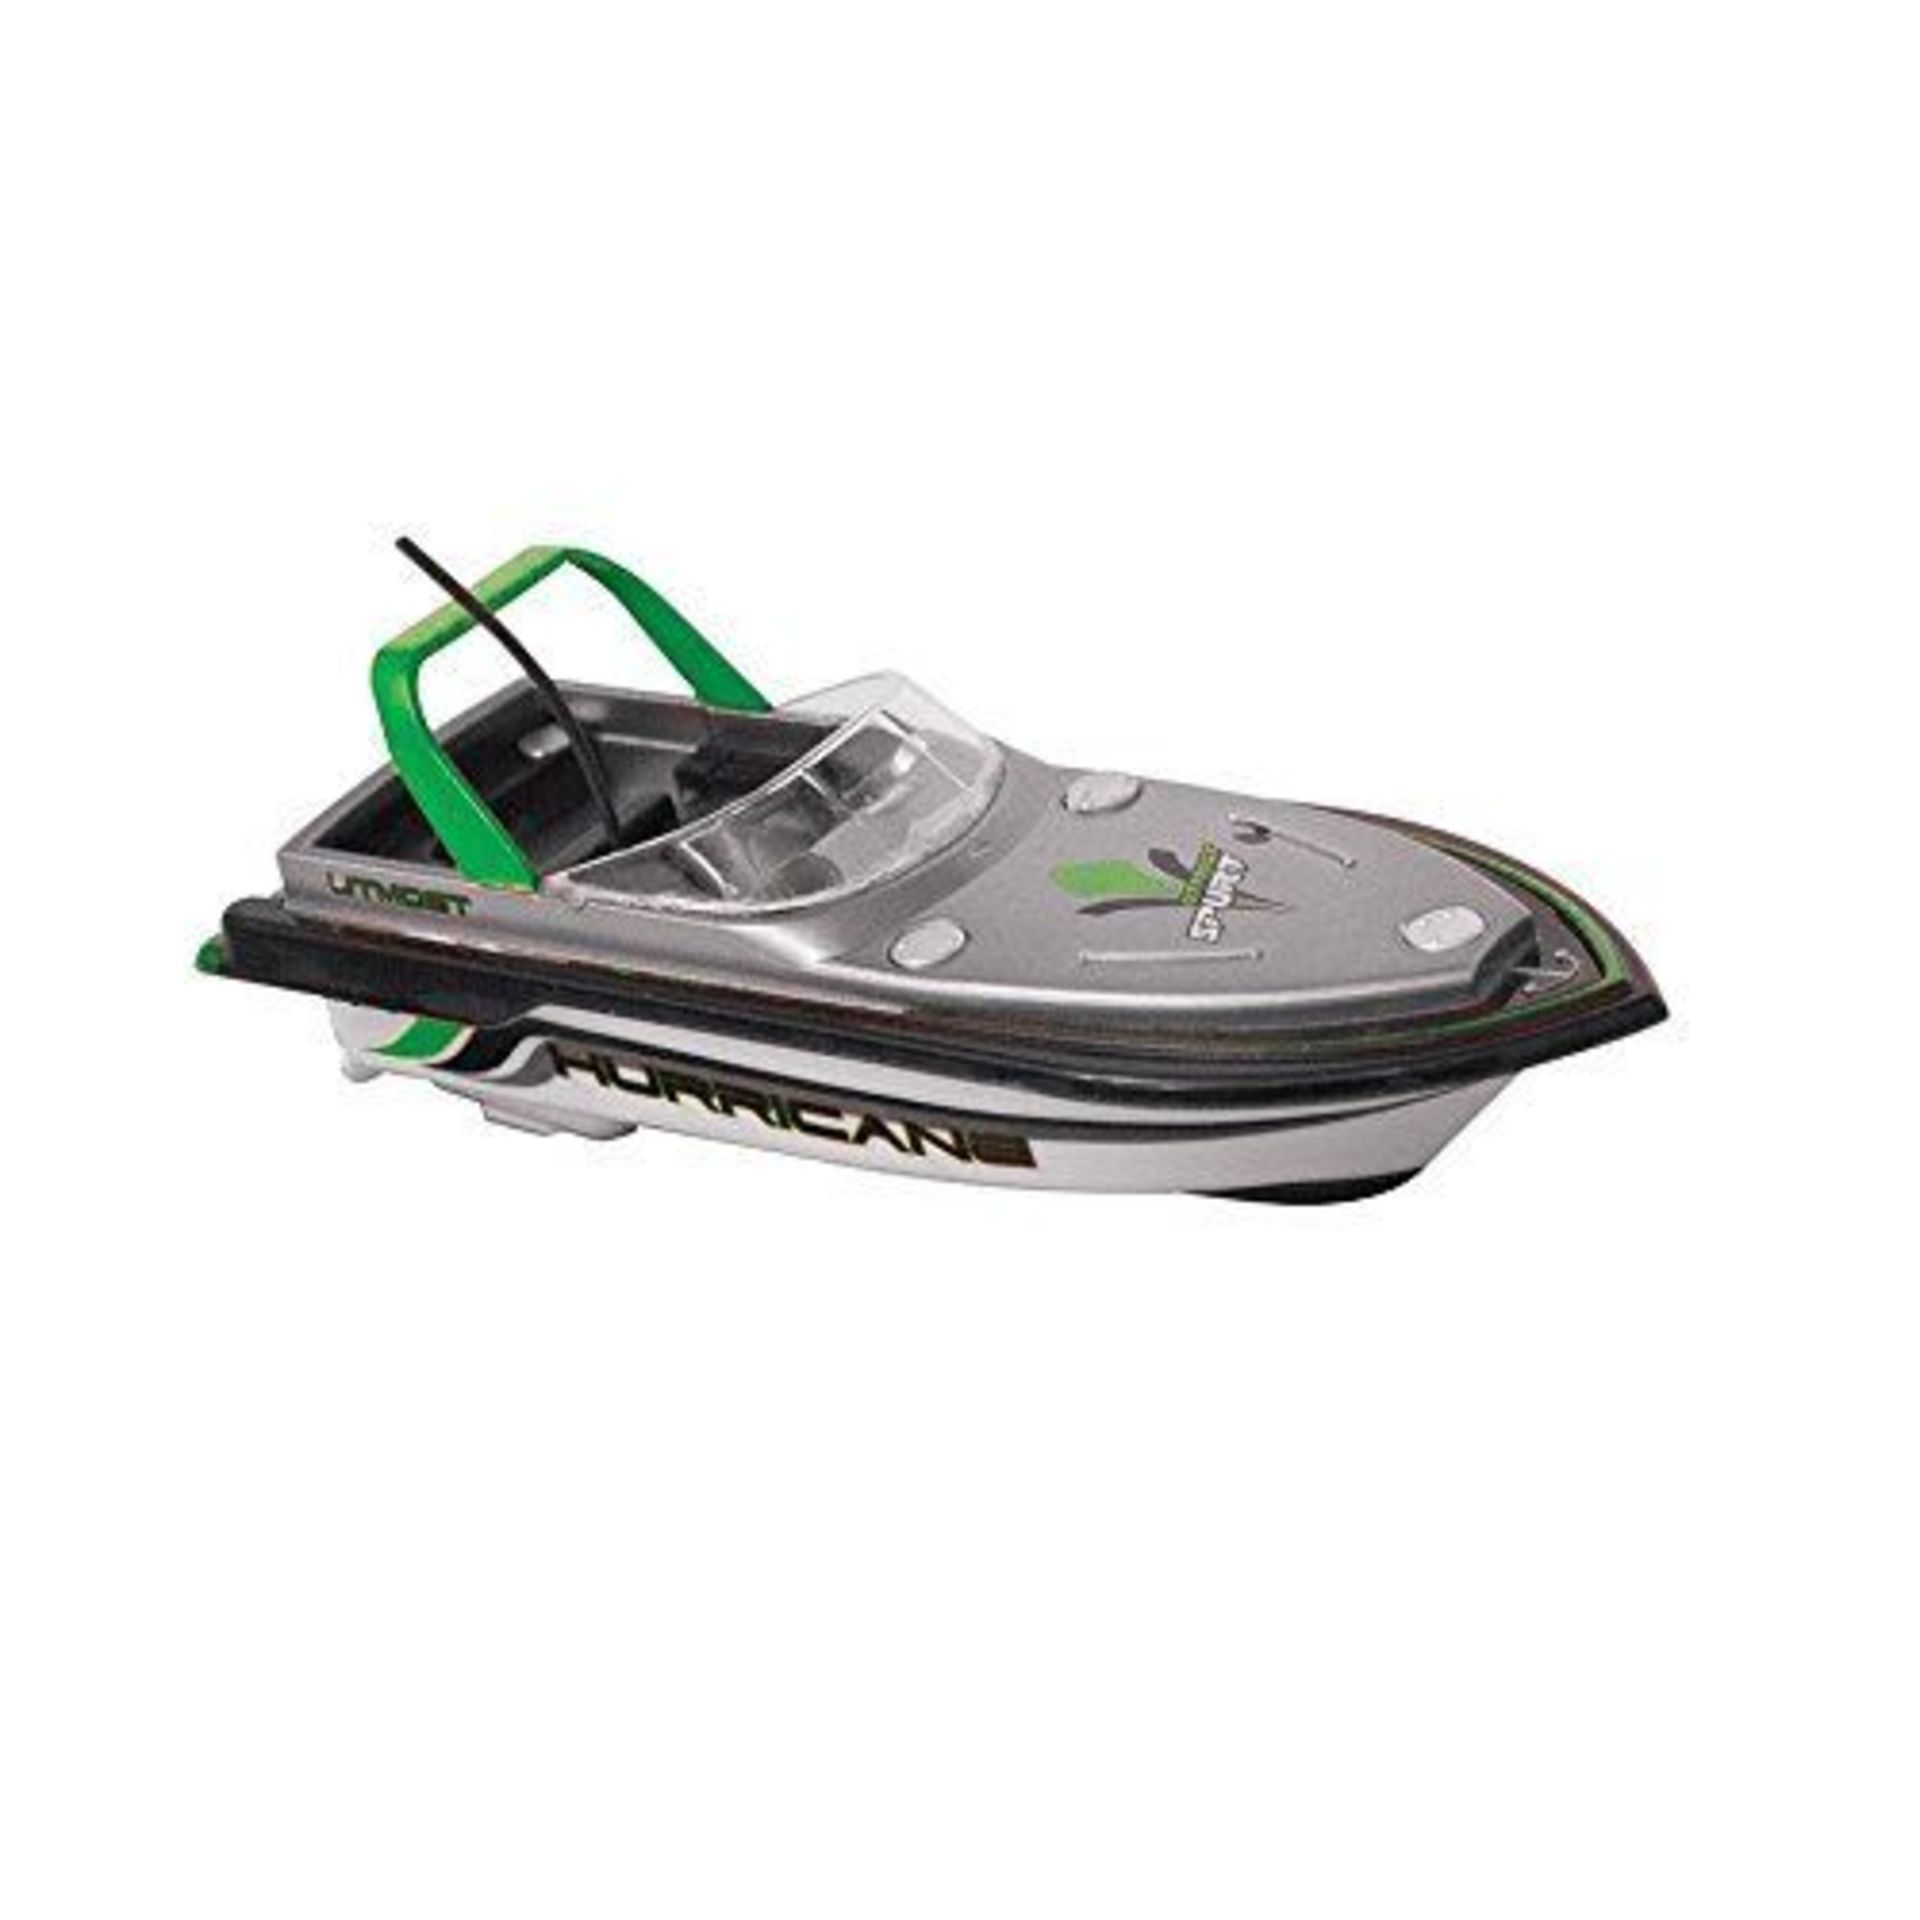 V Brand New Radio Controlled Sport Series Mini Boat Colour May Vary ISP £20-98 (Ebay) X 2 YOUR BID